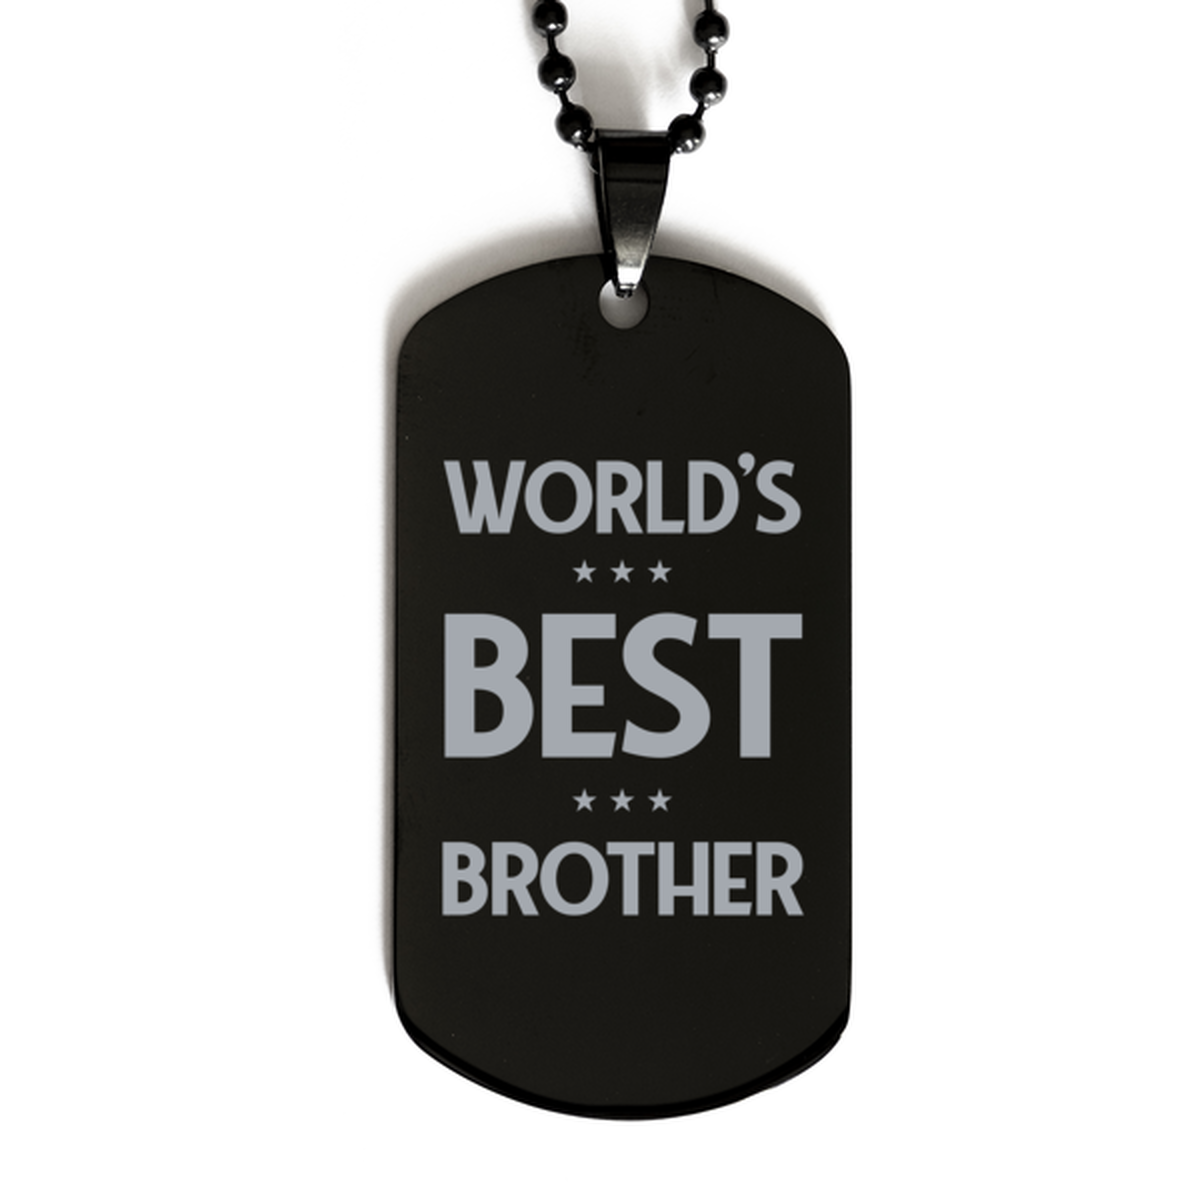 Worlds Best Brother Gifts, Funny Black Engraved Dog Tag For Brother, Birthday Presents For Men